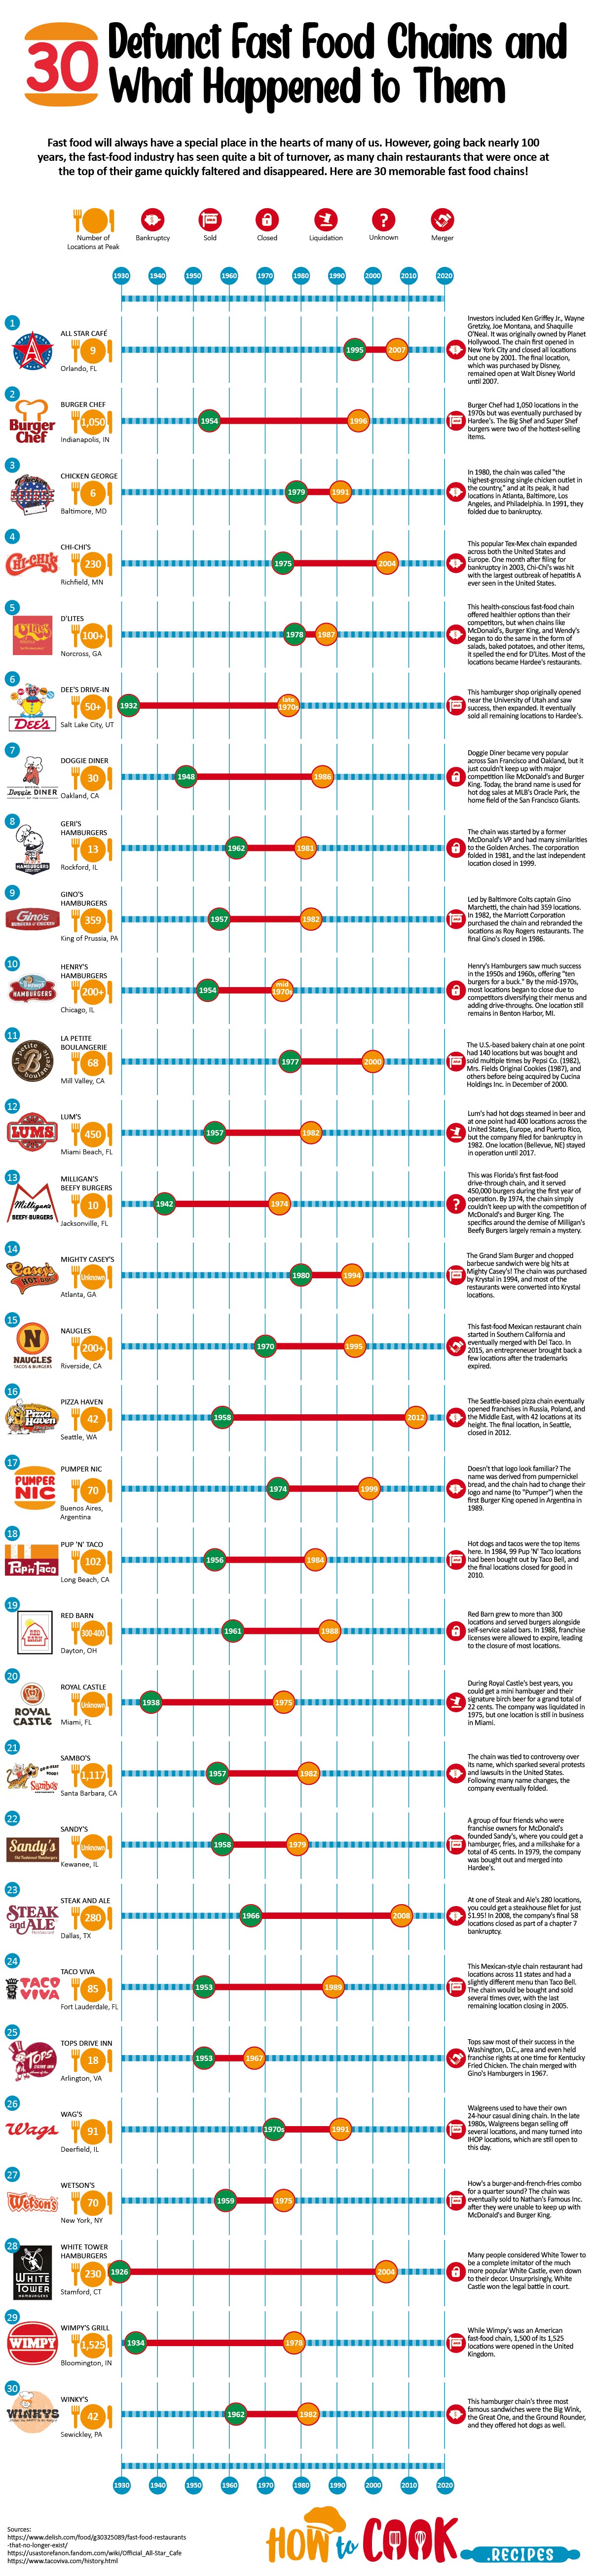 30 Defunct Fast Food Chains and What Happened to Them #Infographic